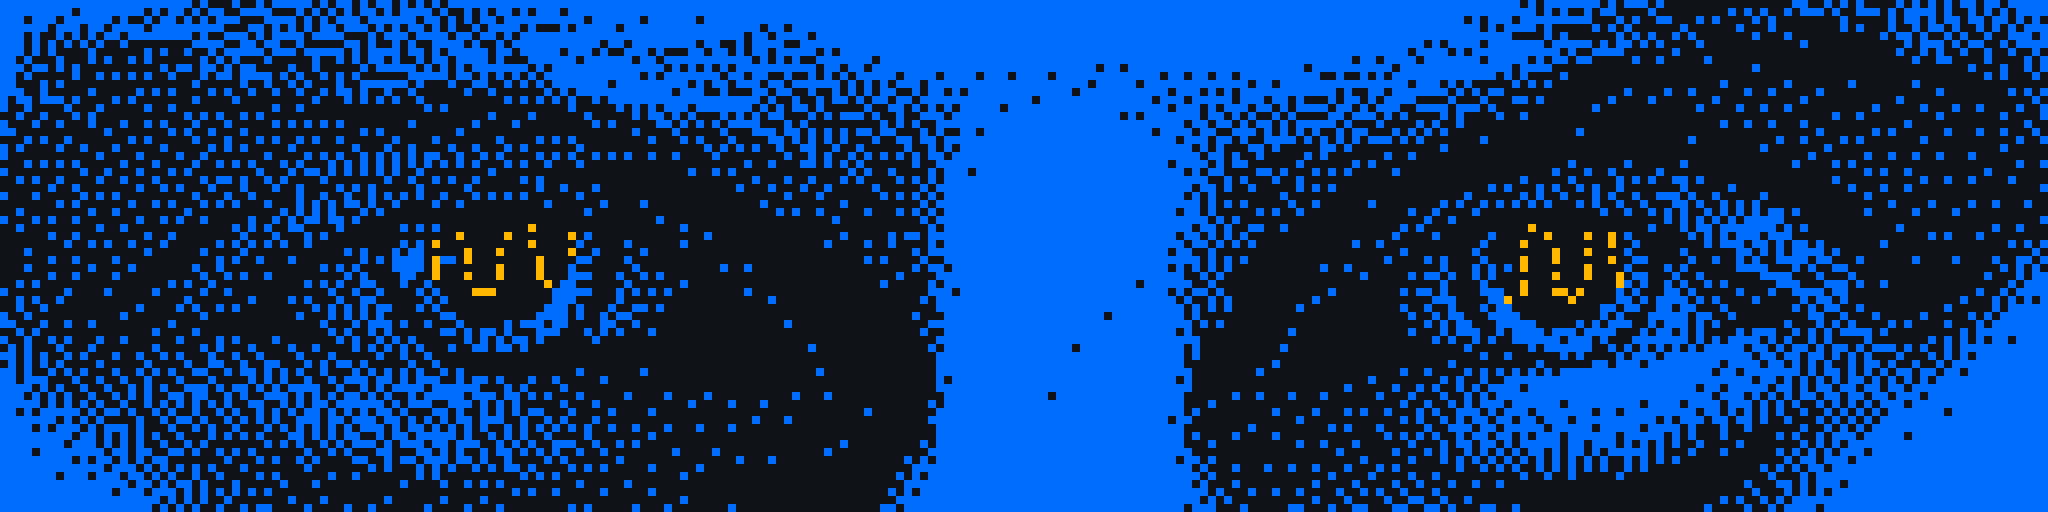 A wide, pixelated, bitmap-style shot of a man’s eyes looking at the camera. Colored in blue.